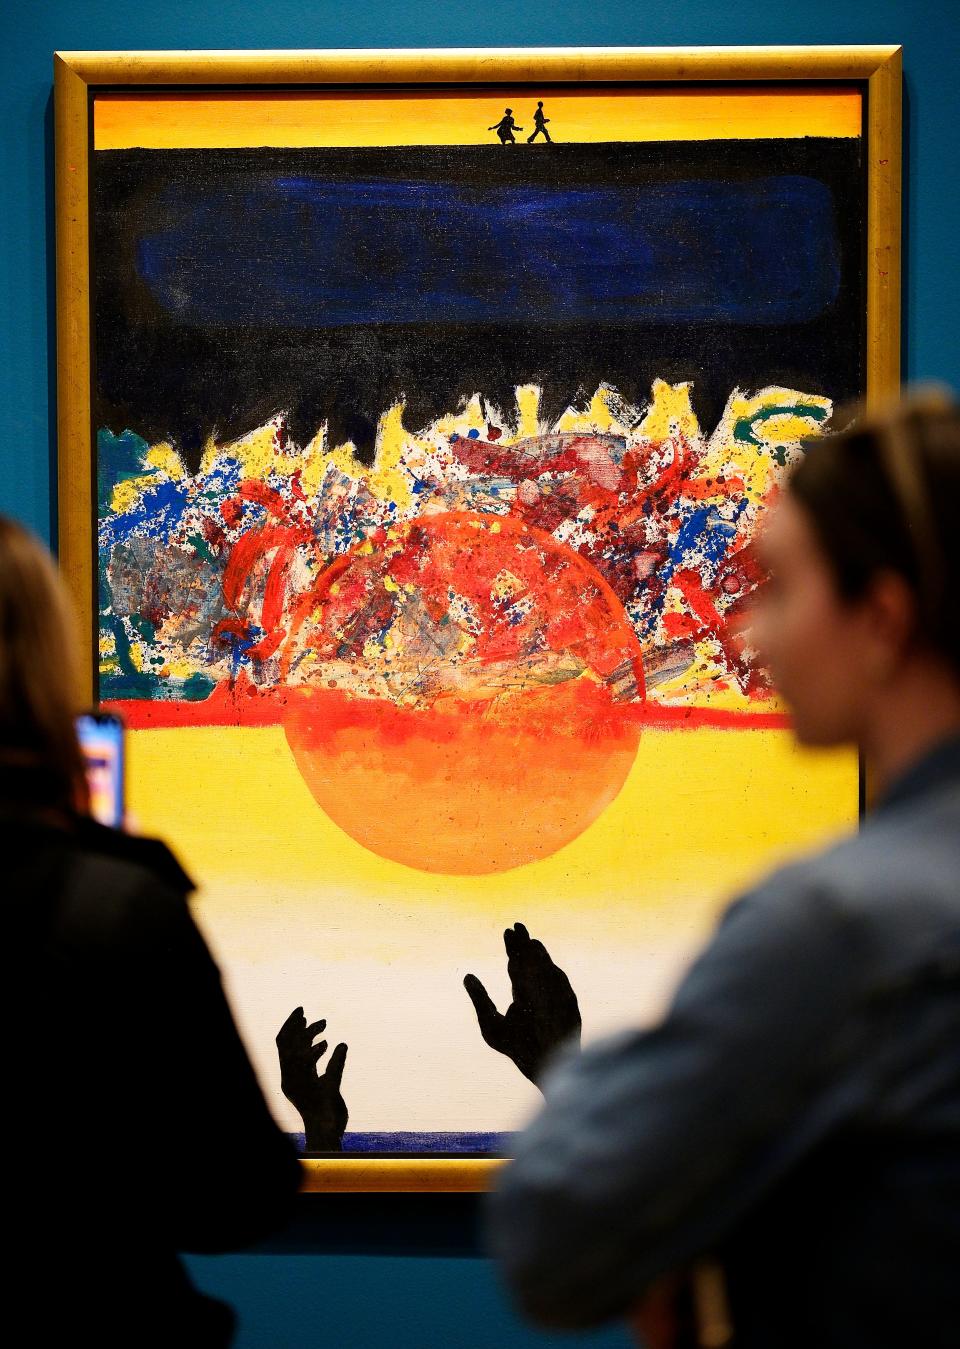 Visitors look Thursday at David C. Driskell's 1972 acrylic on canvas painting "Swing Low, Sweet Chariot" during a media tour of the special exhibition “Art and Activism at Tougaloo College" at the Oklahoma City Museum of Art.